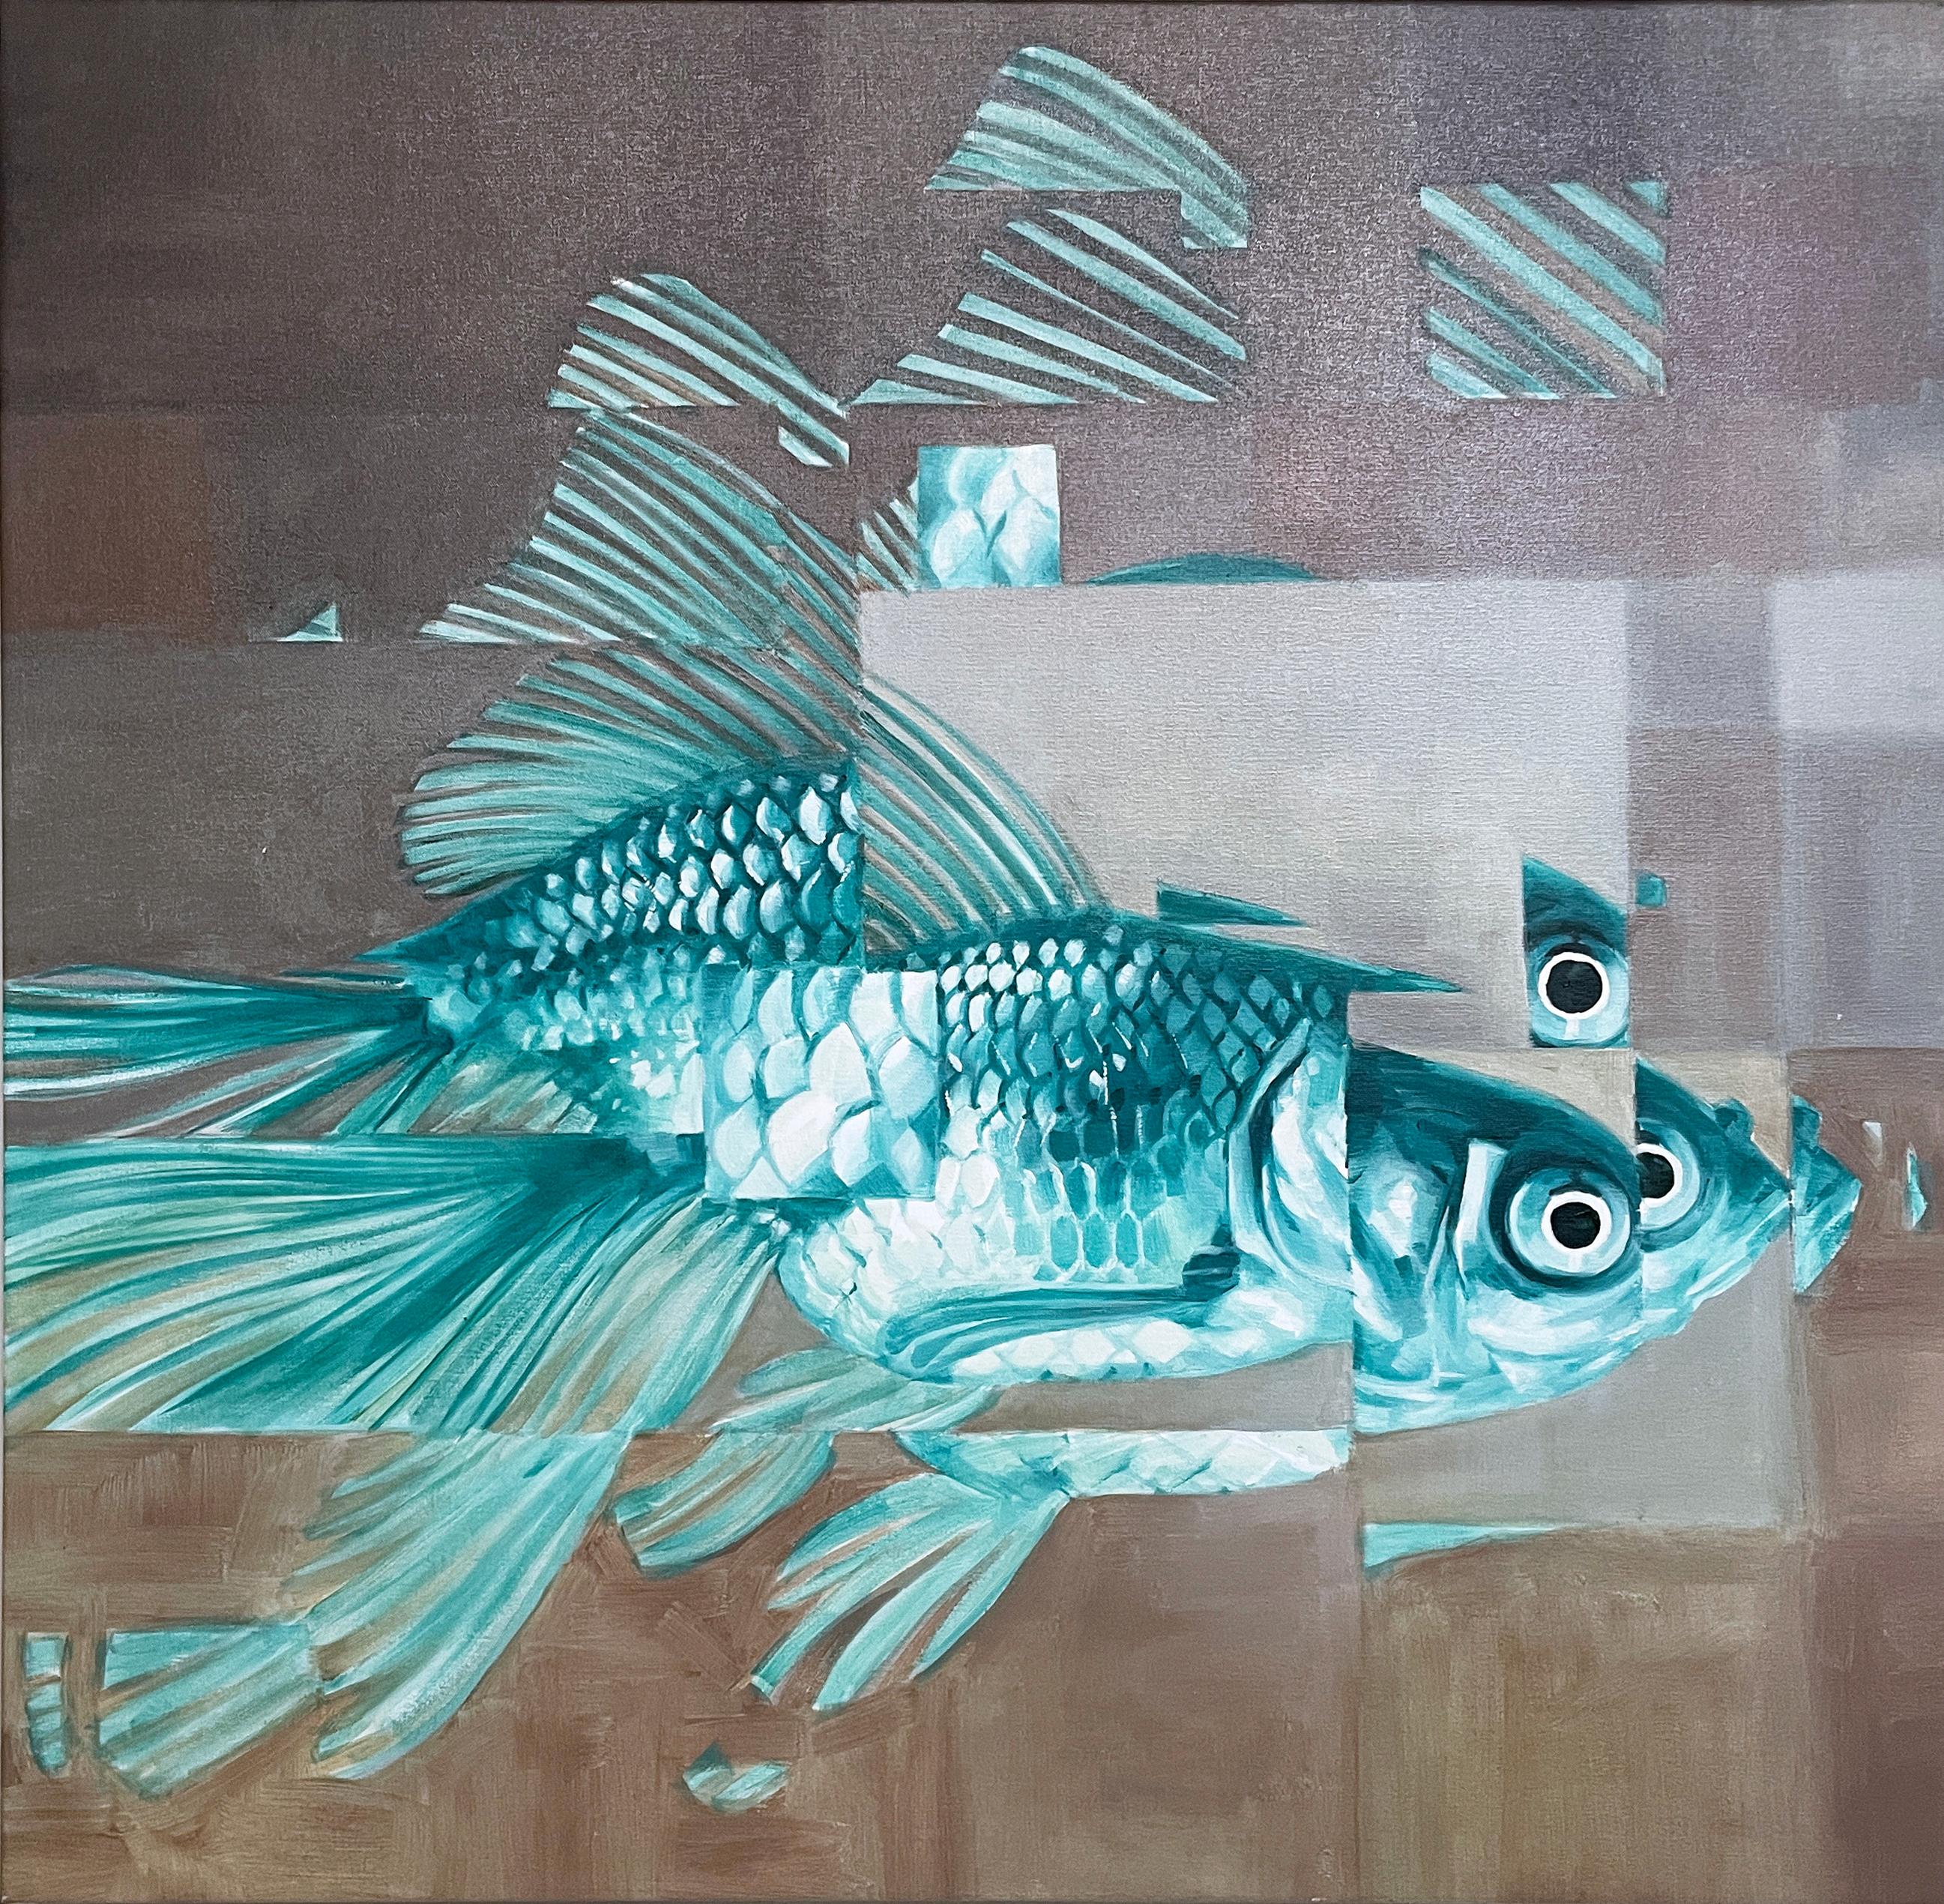 RU8ICON1 Figurative Painting - Big Fish Too (2022) oil on canvas, gray, pewter, blue, pixels, water, goldfish